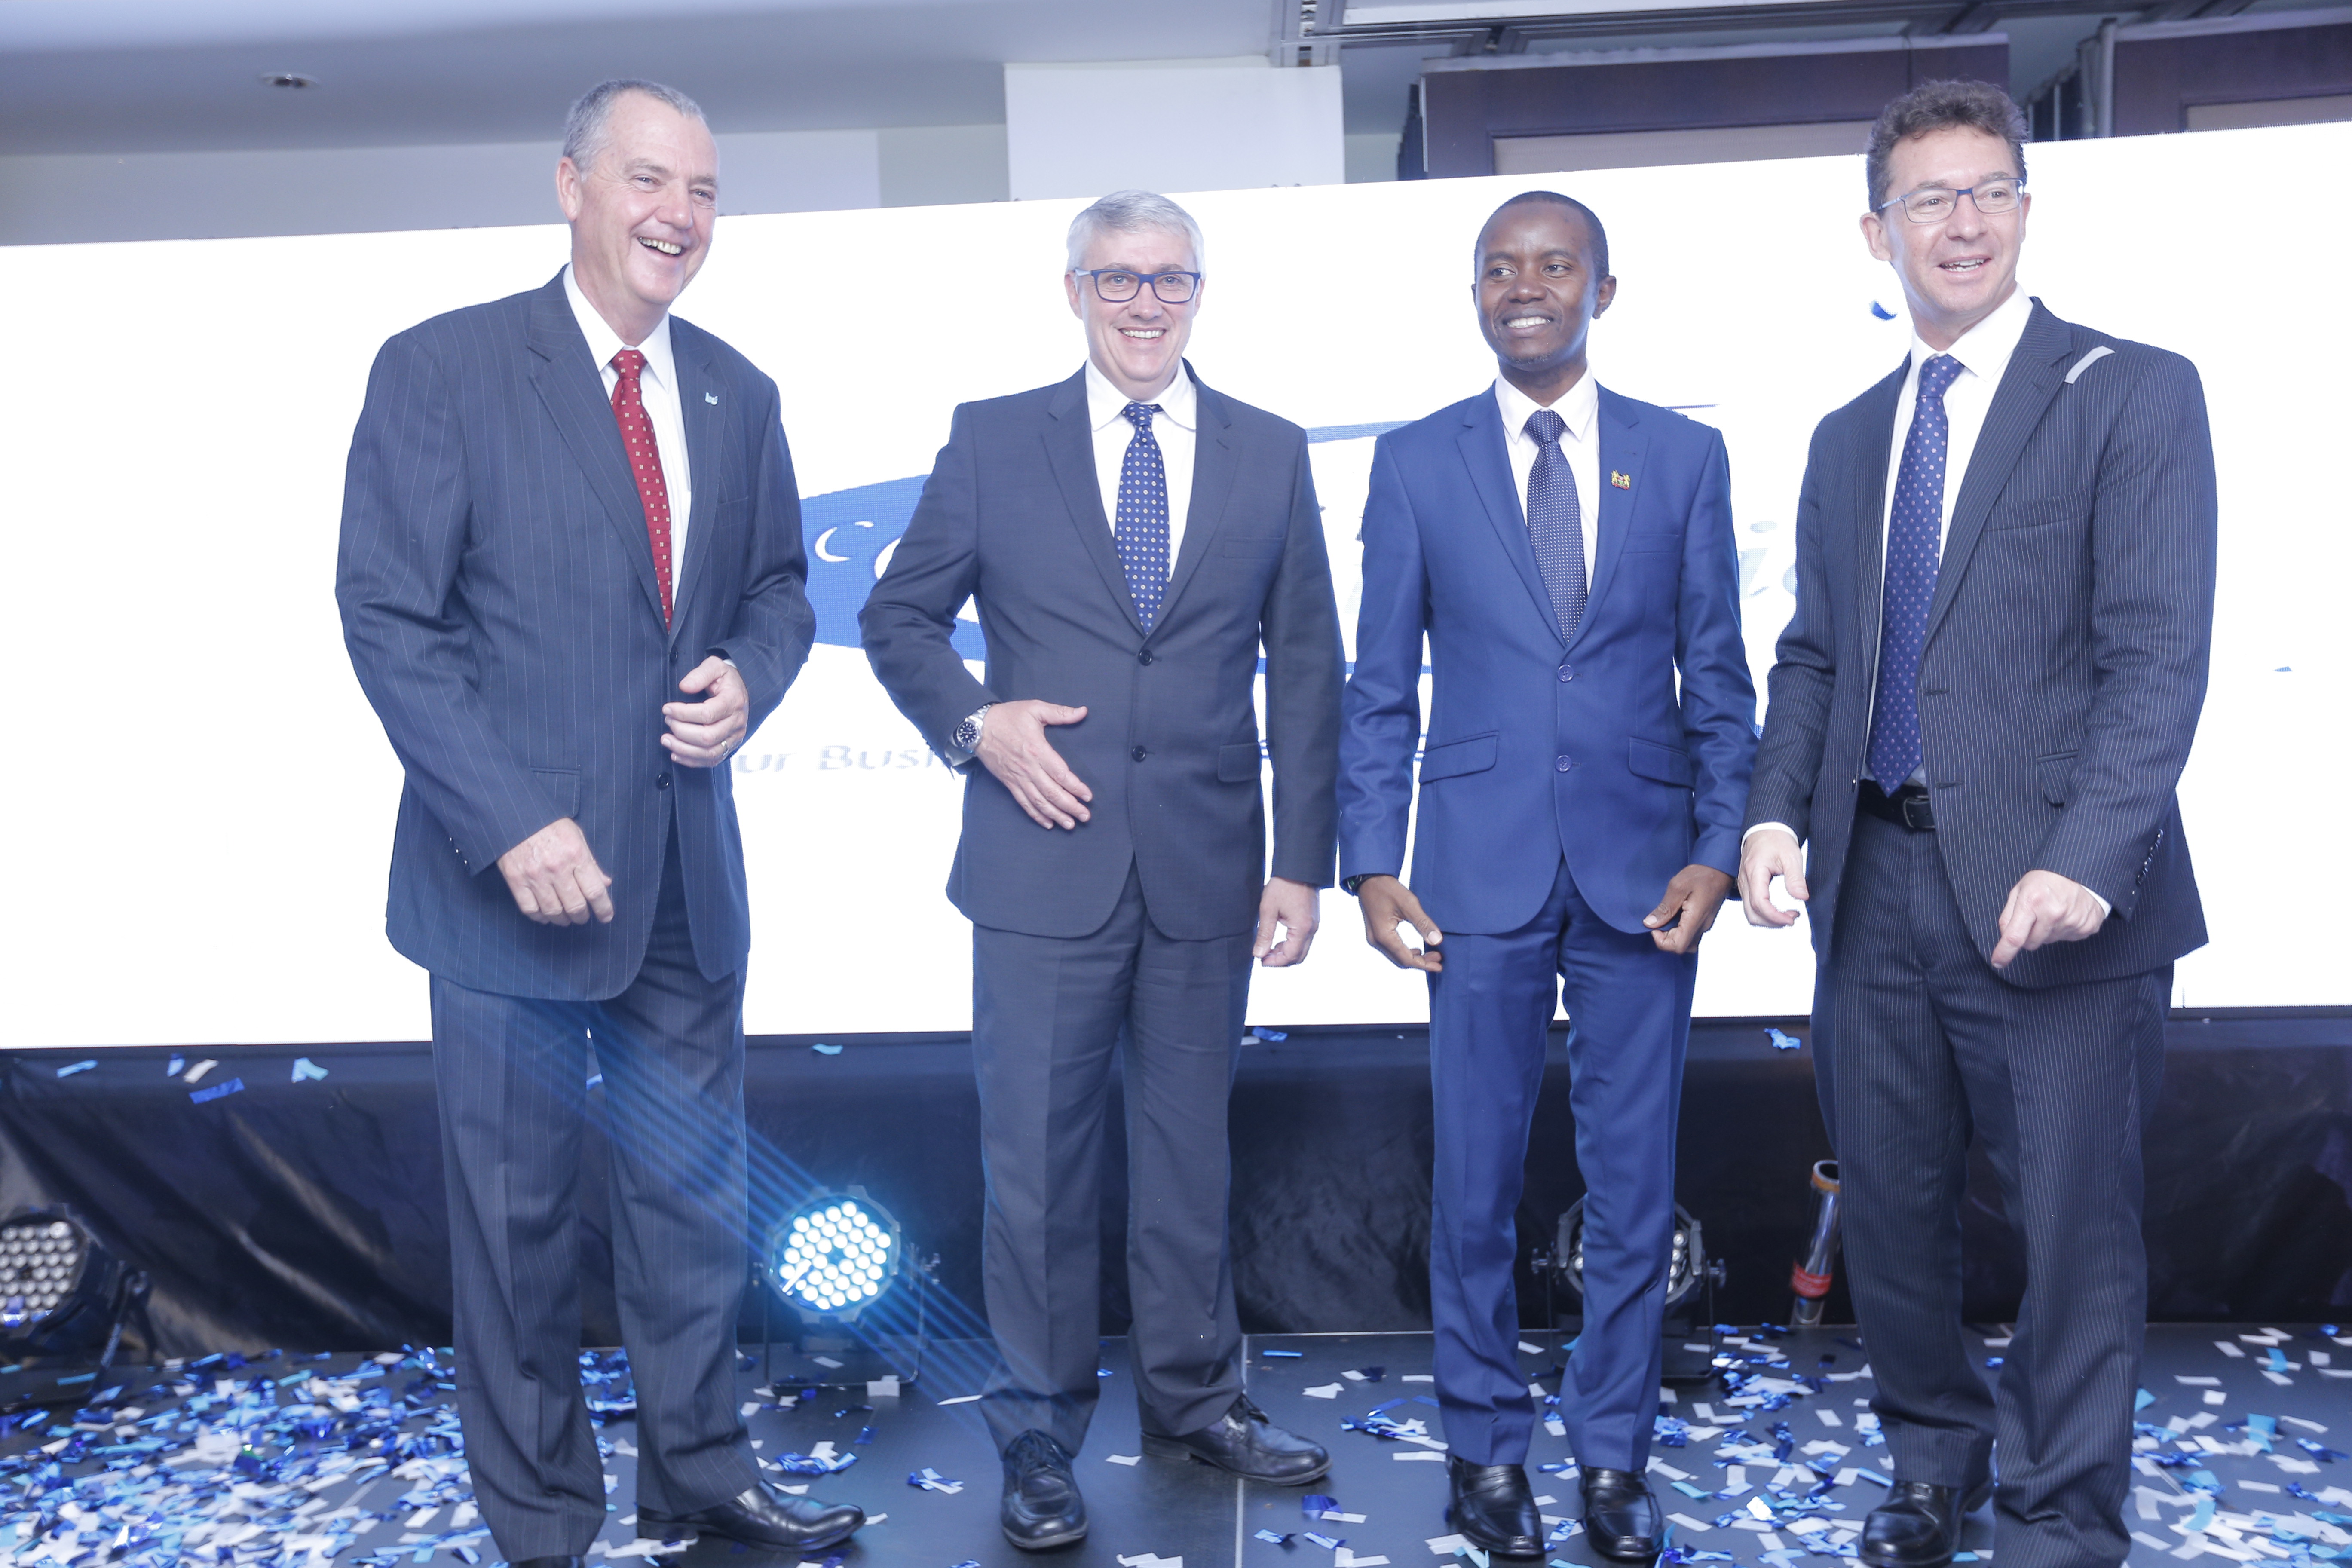 (L-R) Continuity East Africa CEO Pete Frielinghaus, Continuity South Africa CEO William Davies, Cabinet Secretary Ministry of Information, Communication and Technology Hon Joe Mucheru and Internet Solutions Managing Director Richard Hechle during the unveil moment at the launch ceremony of Continuity East Africa Business at Sankara Hotel, Westlands, Nairobi. Continuity East Africa, a subsidiary of Internet Solutions, will offer Business Continuity Management Services to public and private organizations in the East African region.